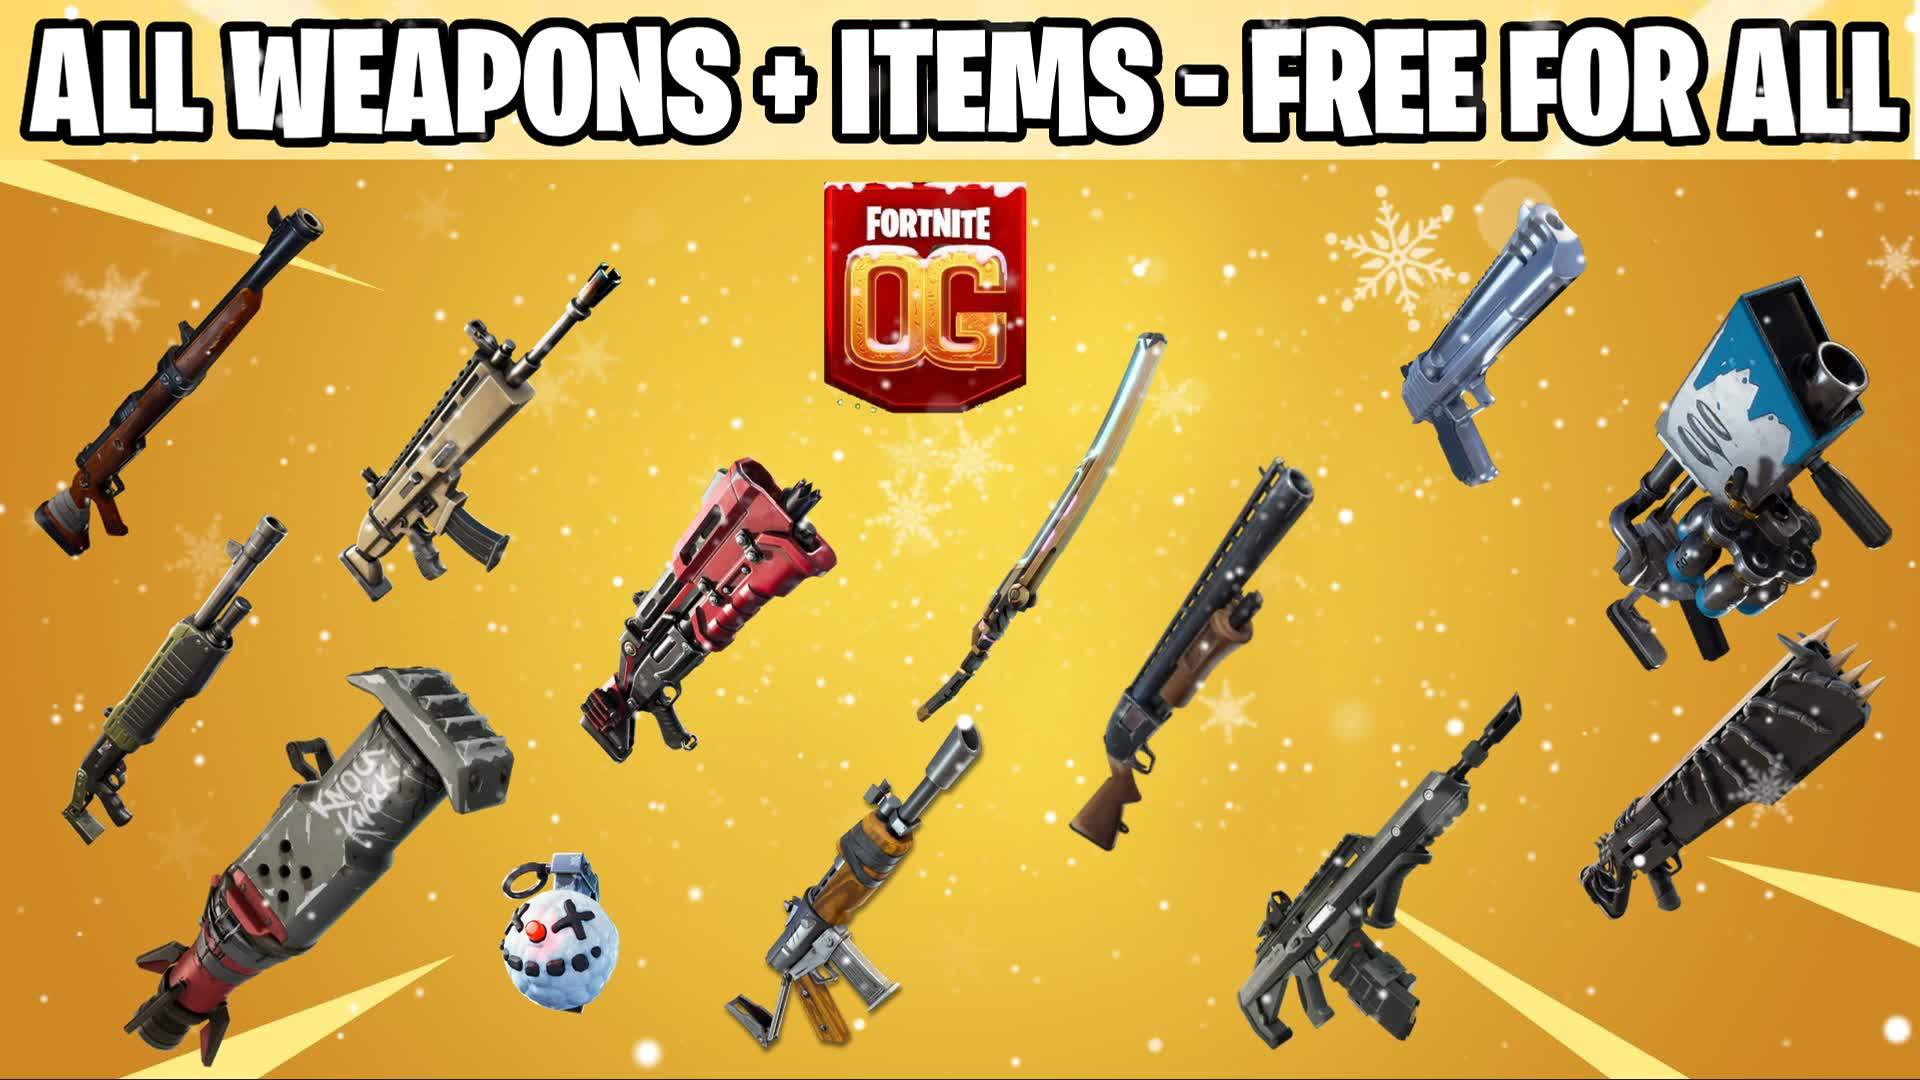 ❄EVERY WEAPON + ITEMS - FREE FOR ALL ❄